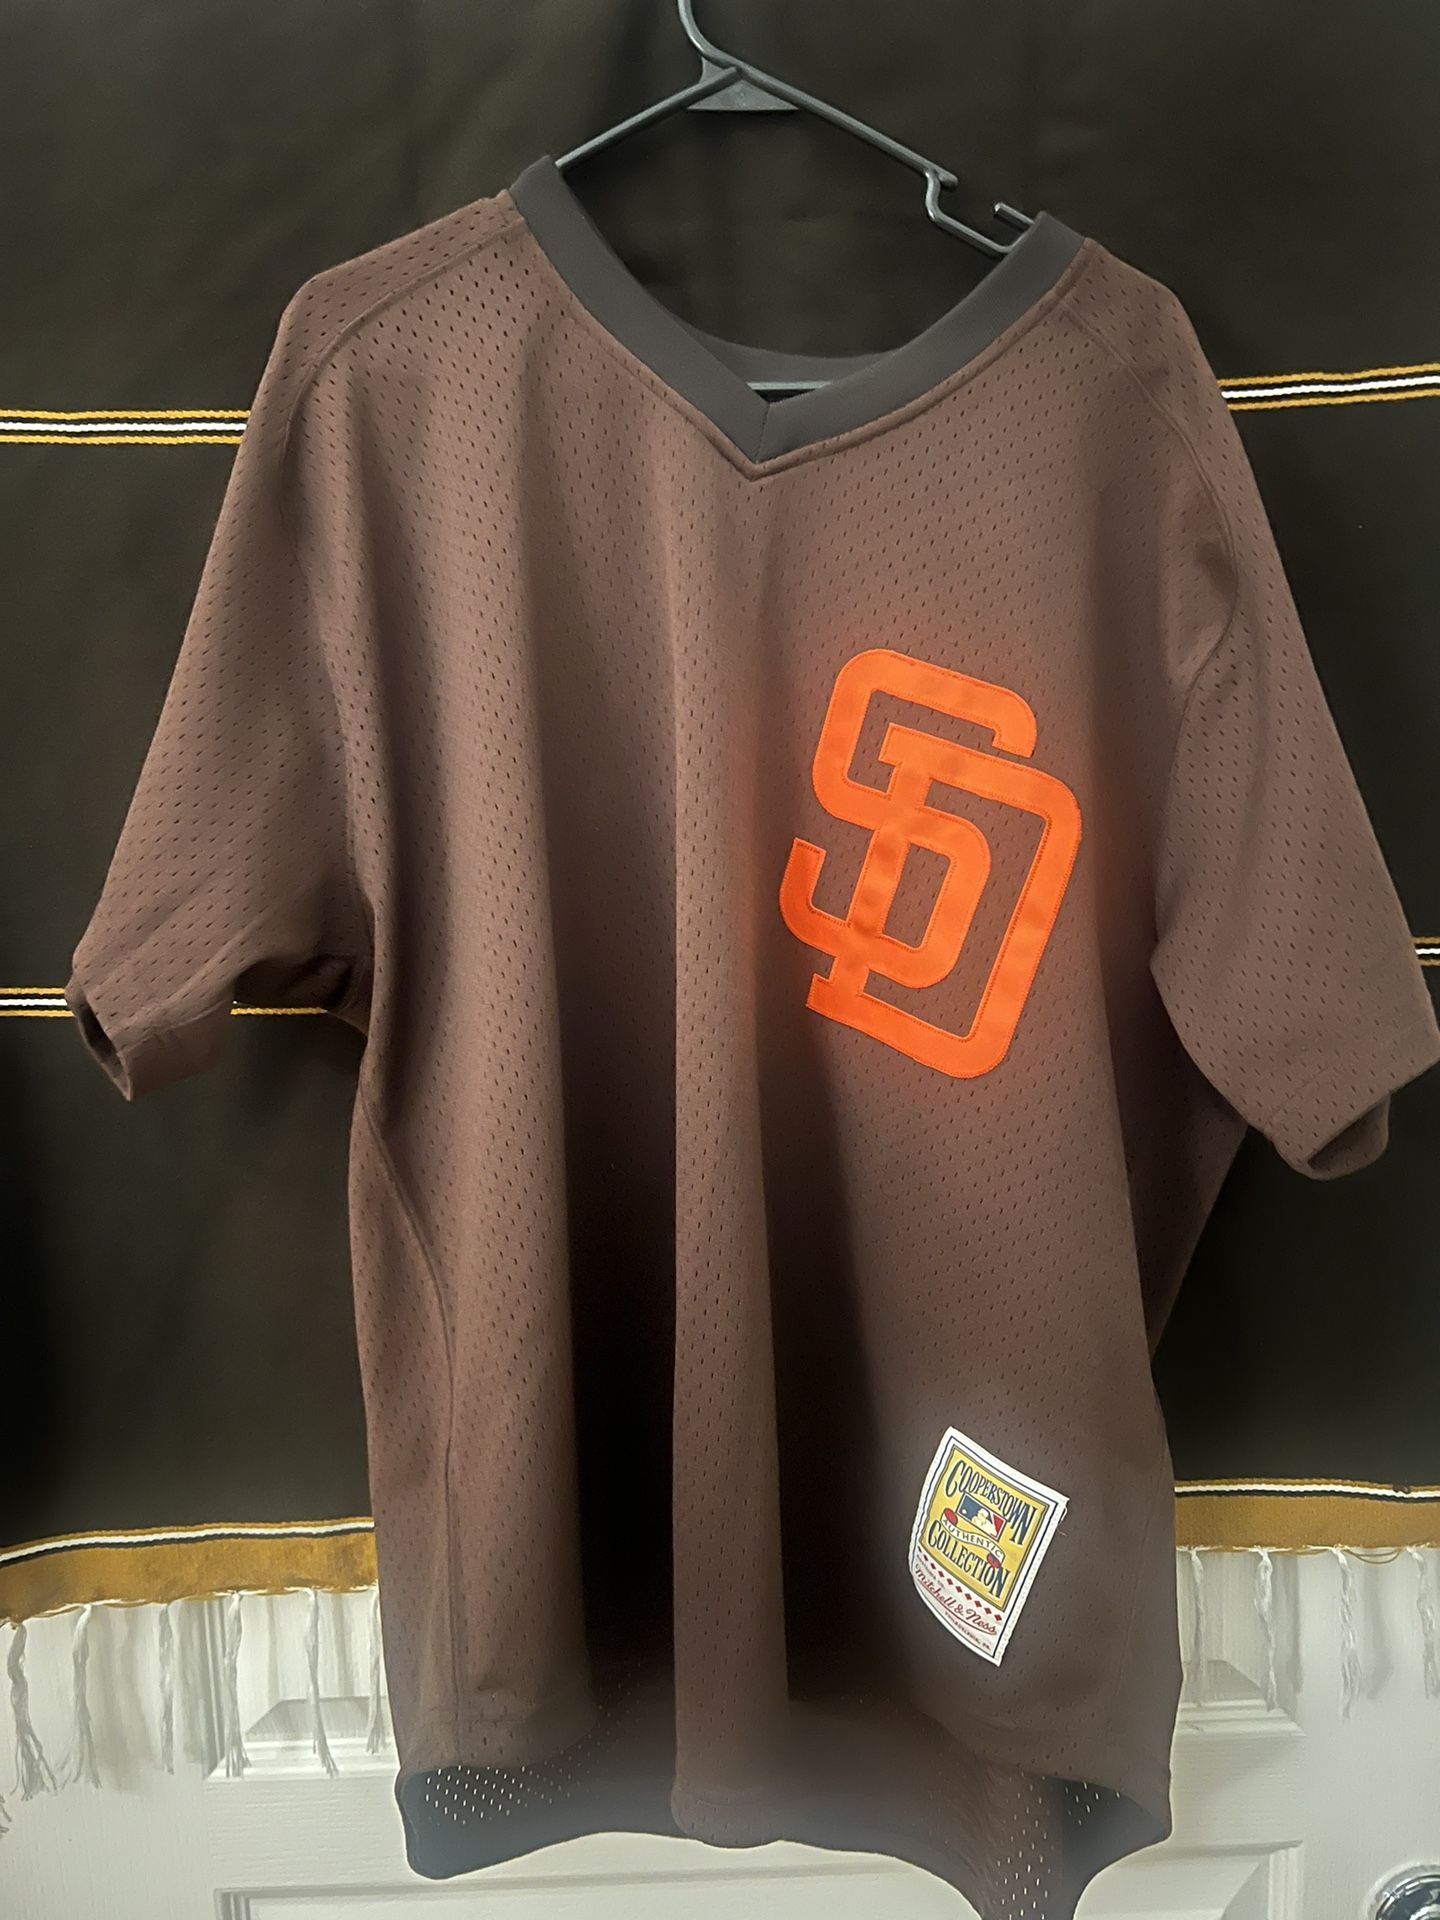 (Authentic) San Diego Padres 2004 jersey for Sale in Chula Vista, CA -  OfferUp